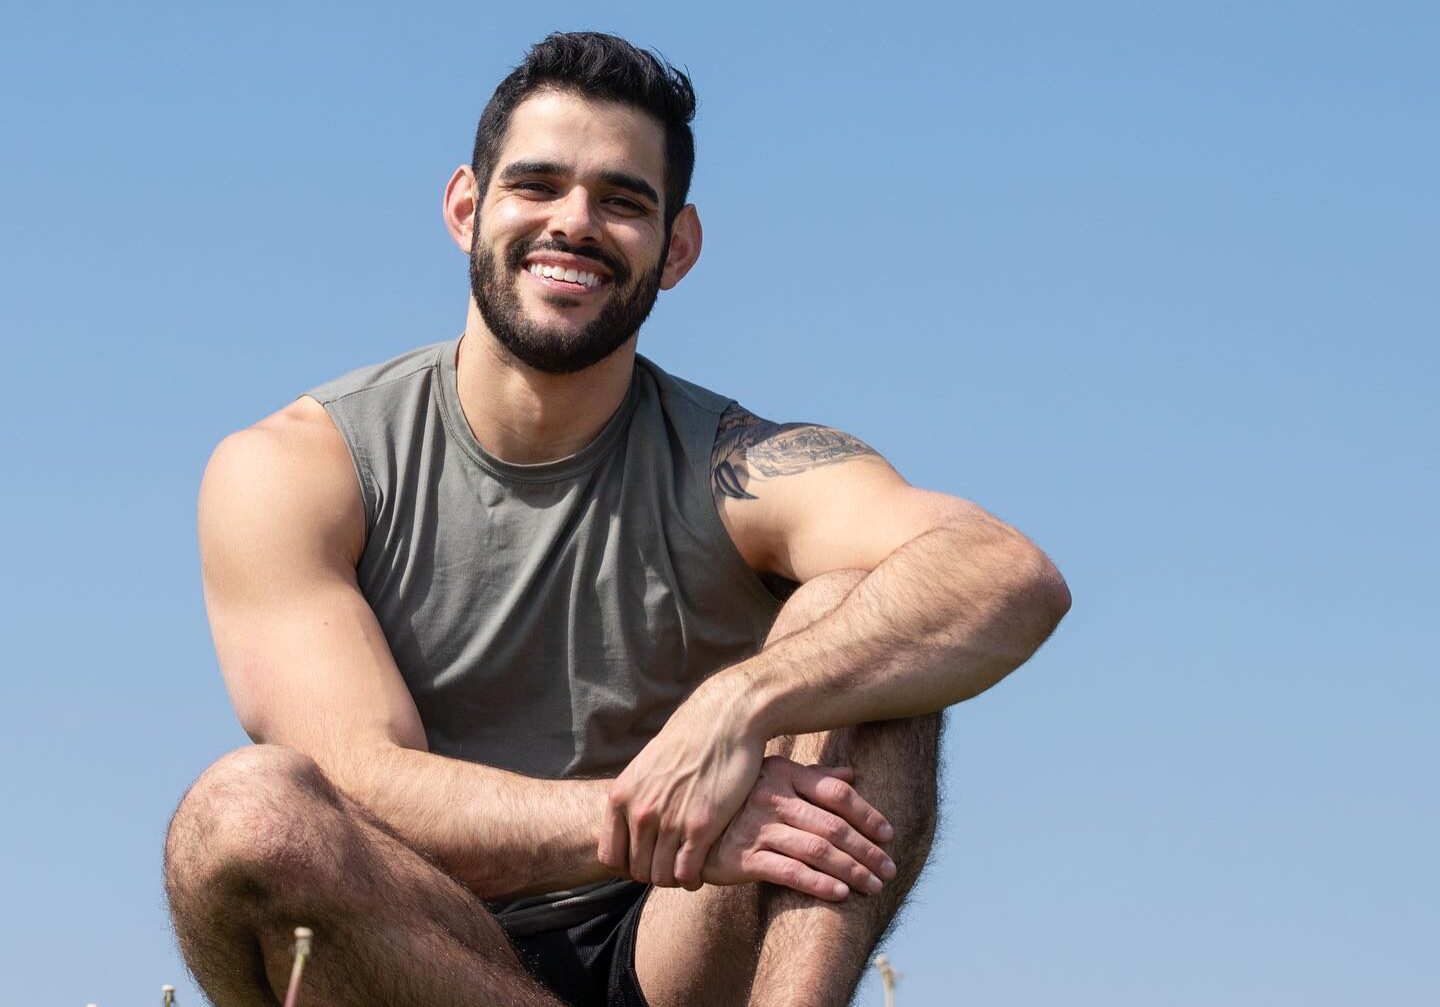 Ricky Locci credits the power of movement and exercise with his ability to overcome years of physical and mental health struggles. Now he wants to empower underserved communities to heal their bodies and minds through physical therapy and preventative healthcare.